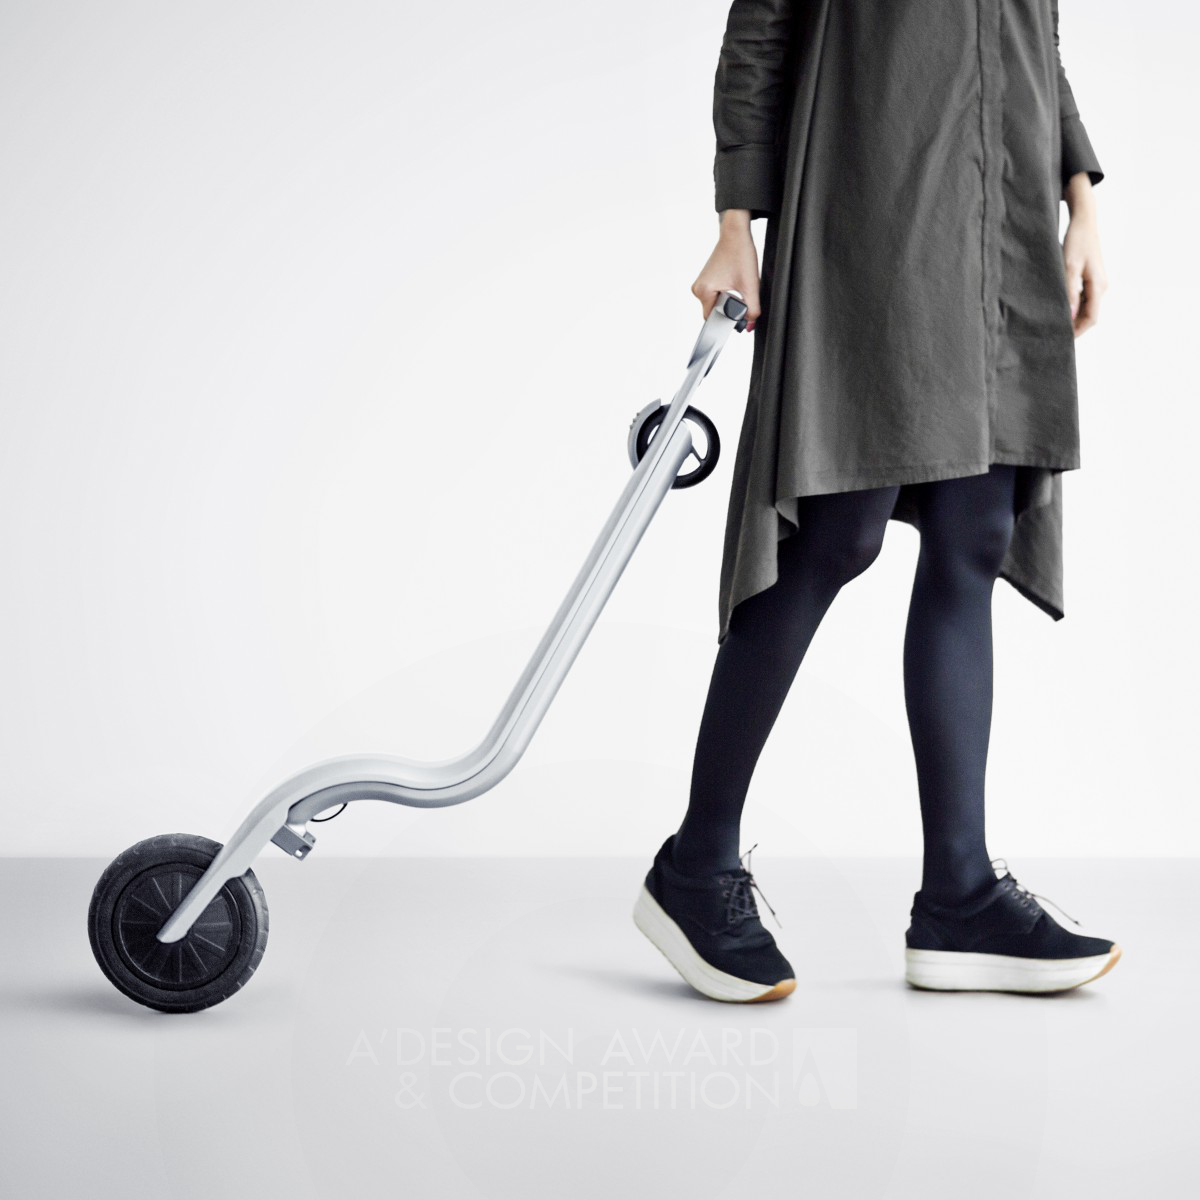 Eagle Electric kick scooter